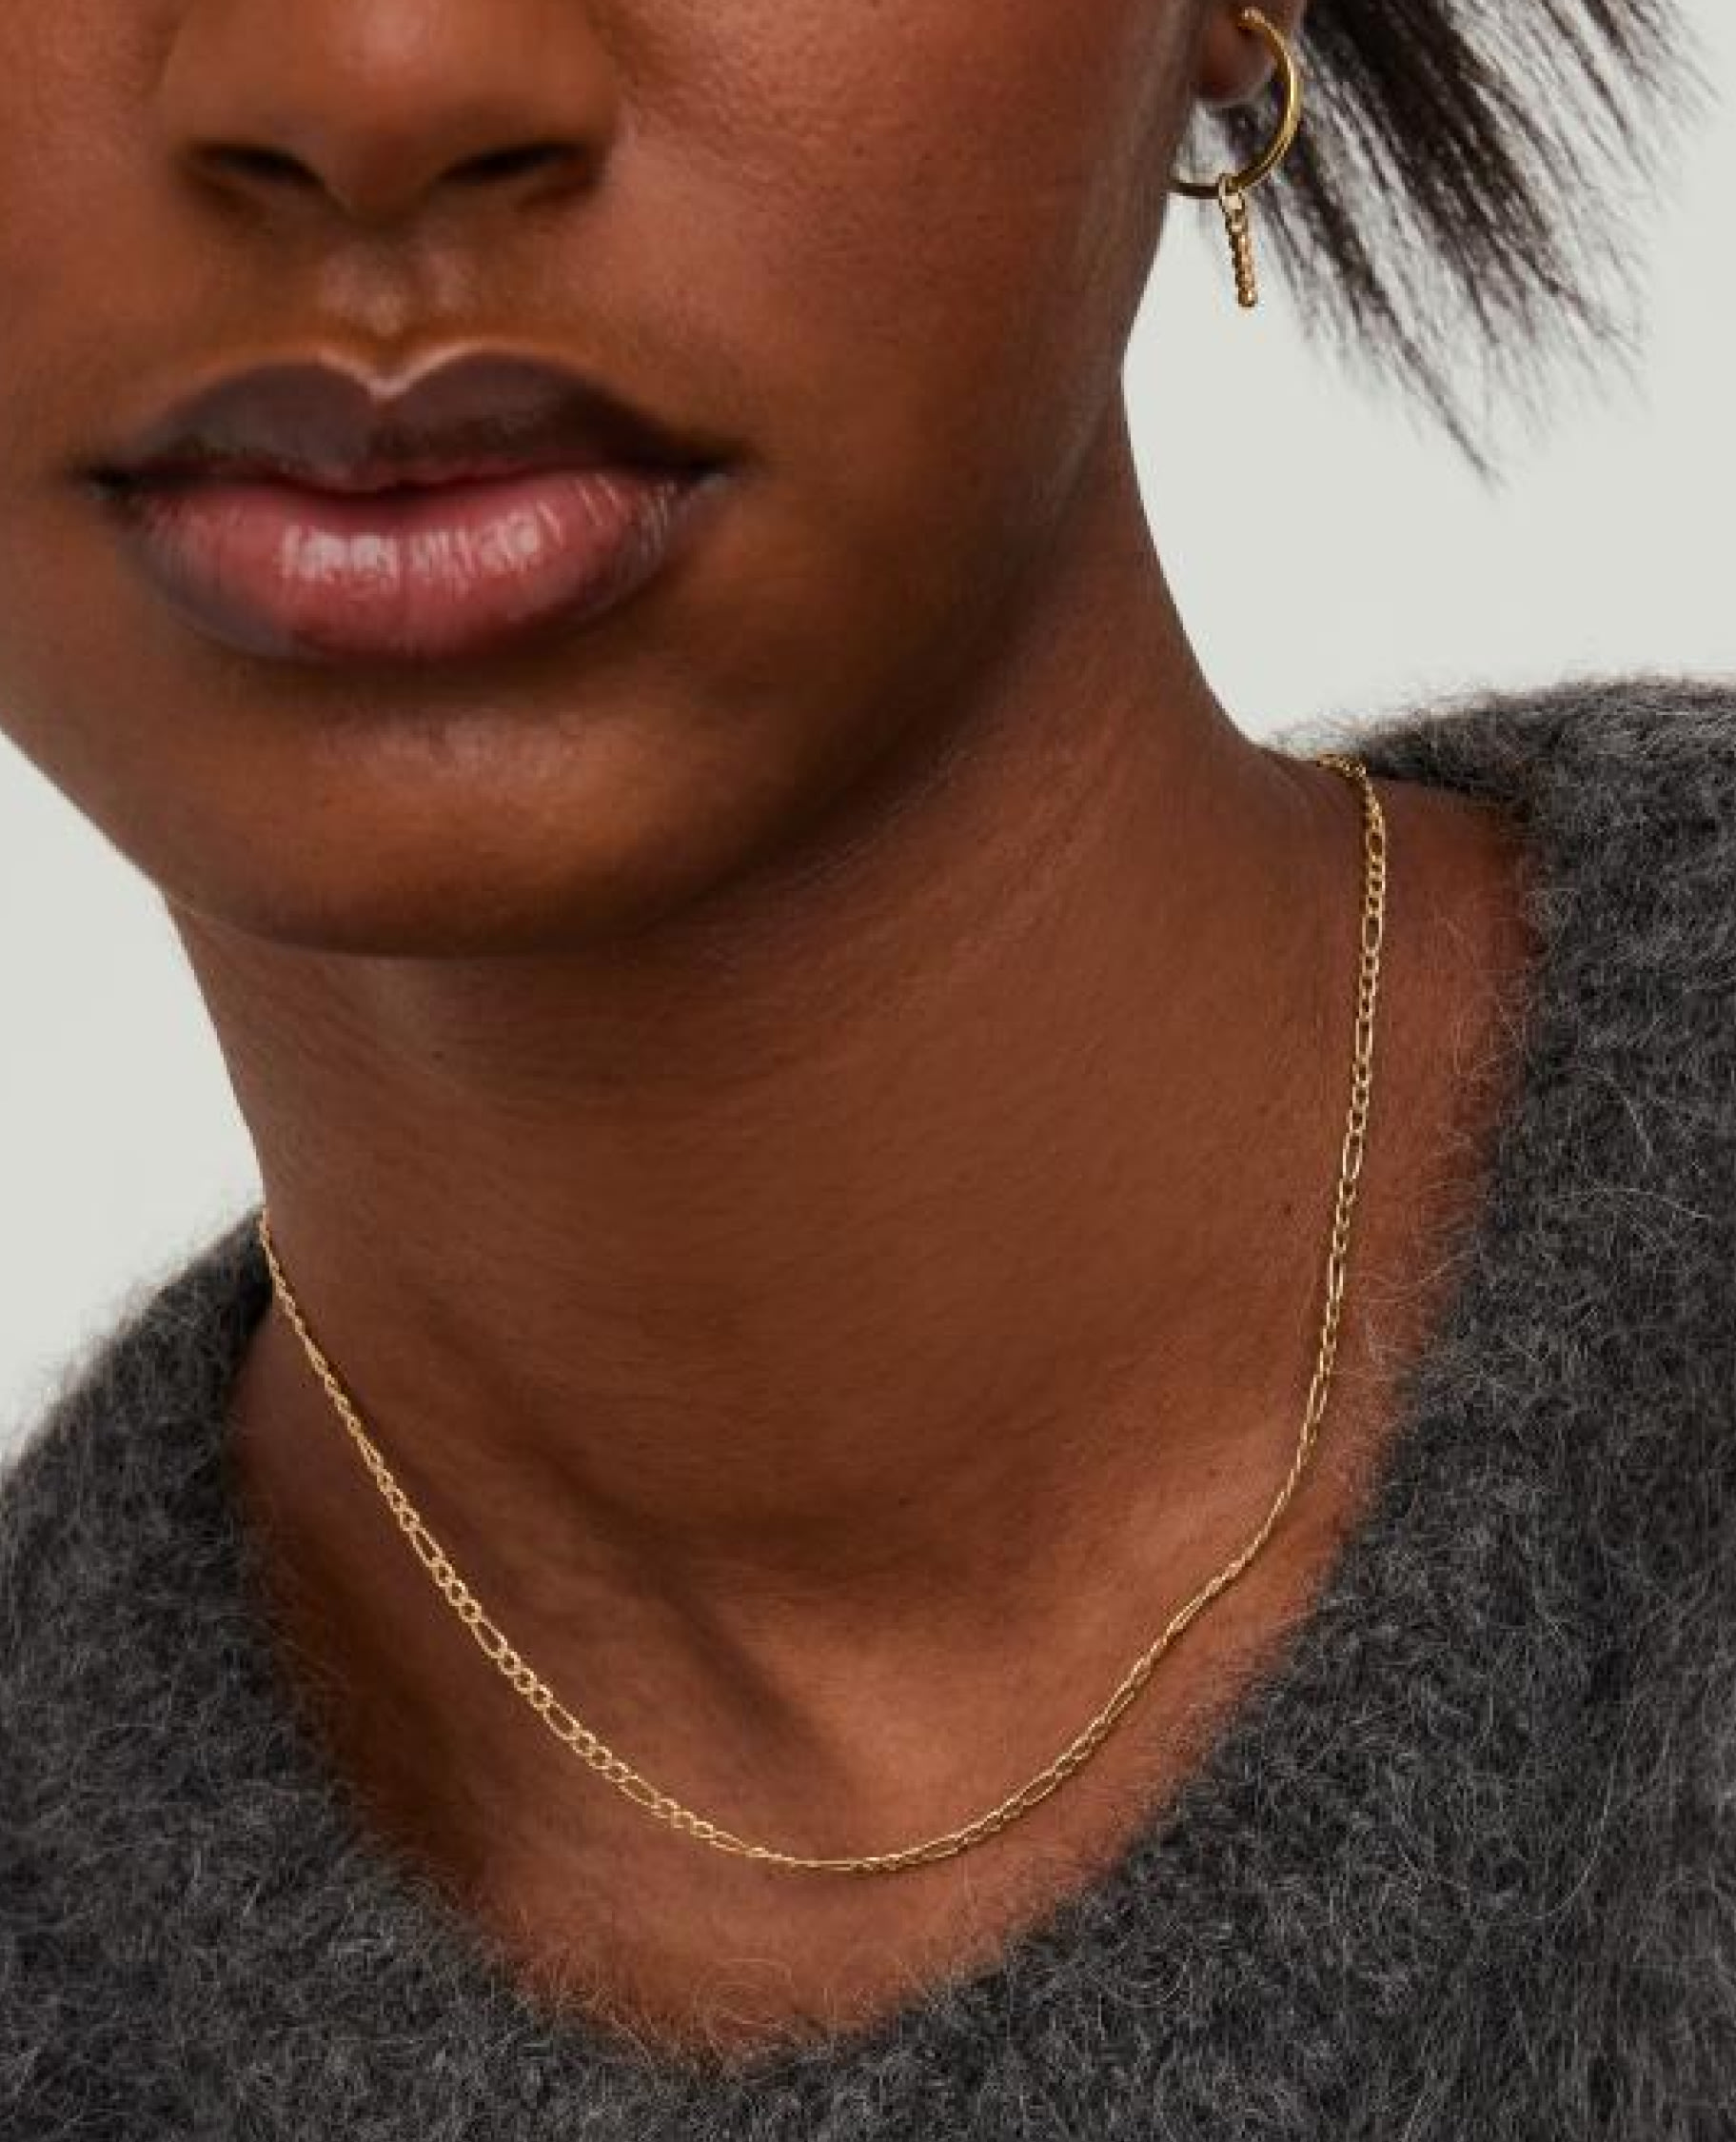 14K Solid Gold Necklace, Thin Chain, Lightweight Chain